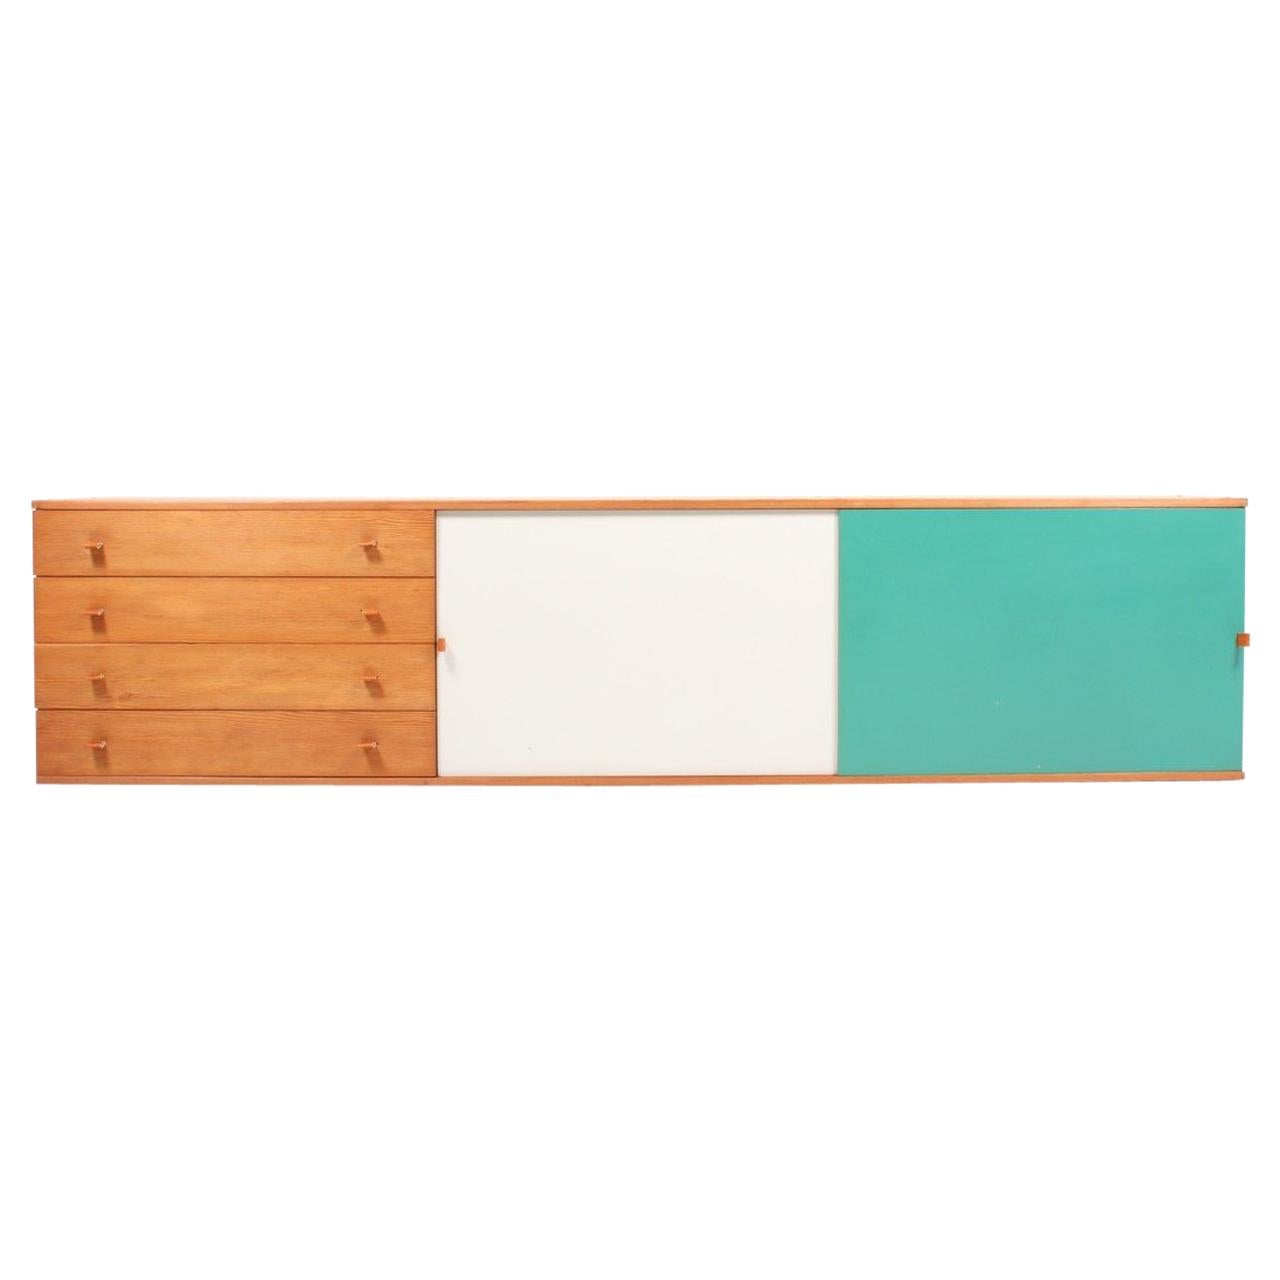 Rare Midcentury Wall-Mounted Sideboard in Oregon Pine with Colored Panels